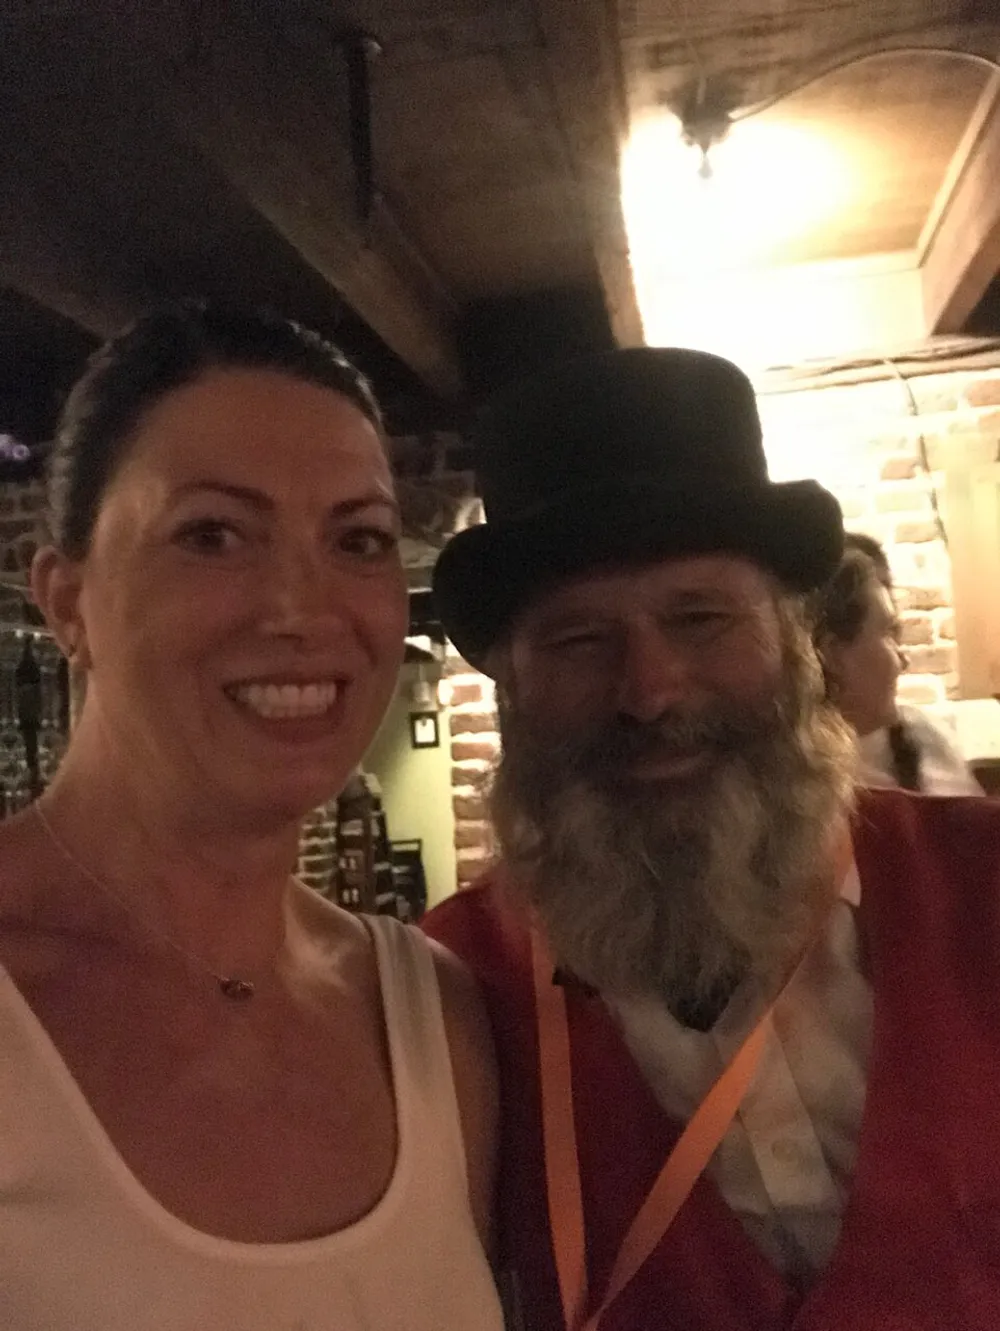 A woman and a man with a beard and top hat are taking a friendly selfie together